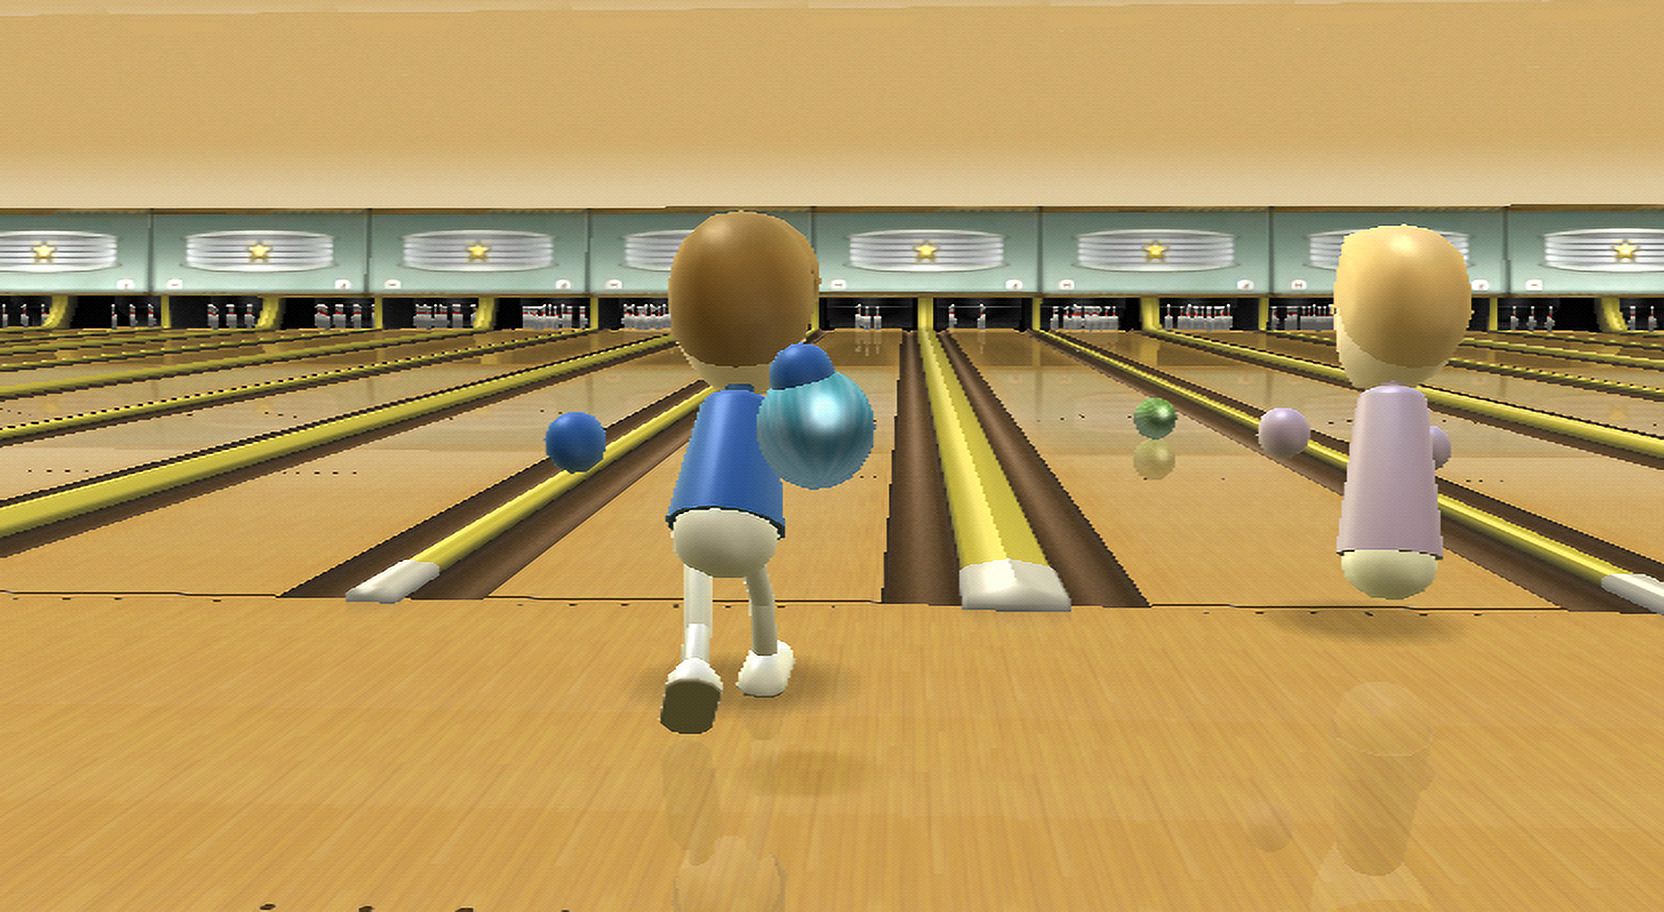 Wii Sports - Nintendo Selects (Wii) - image 3 of 5